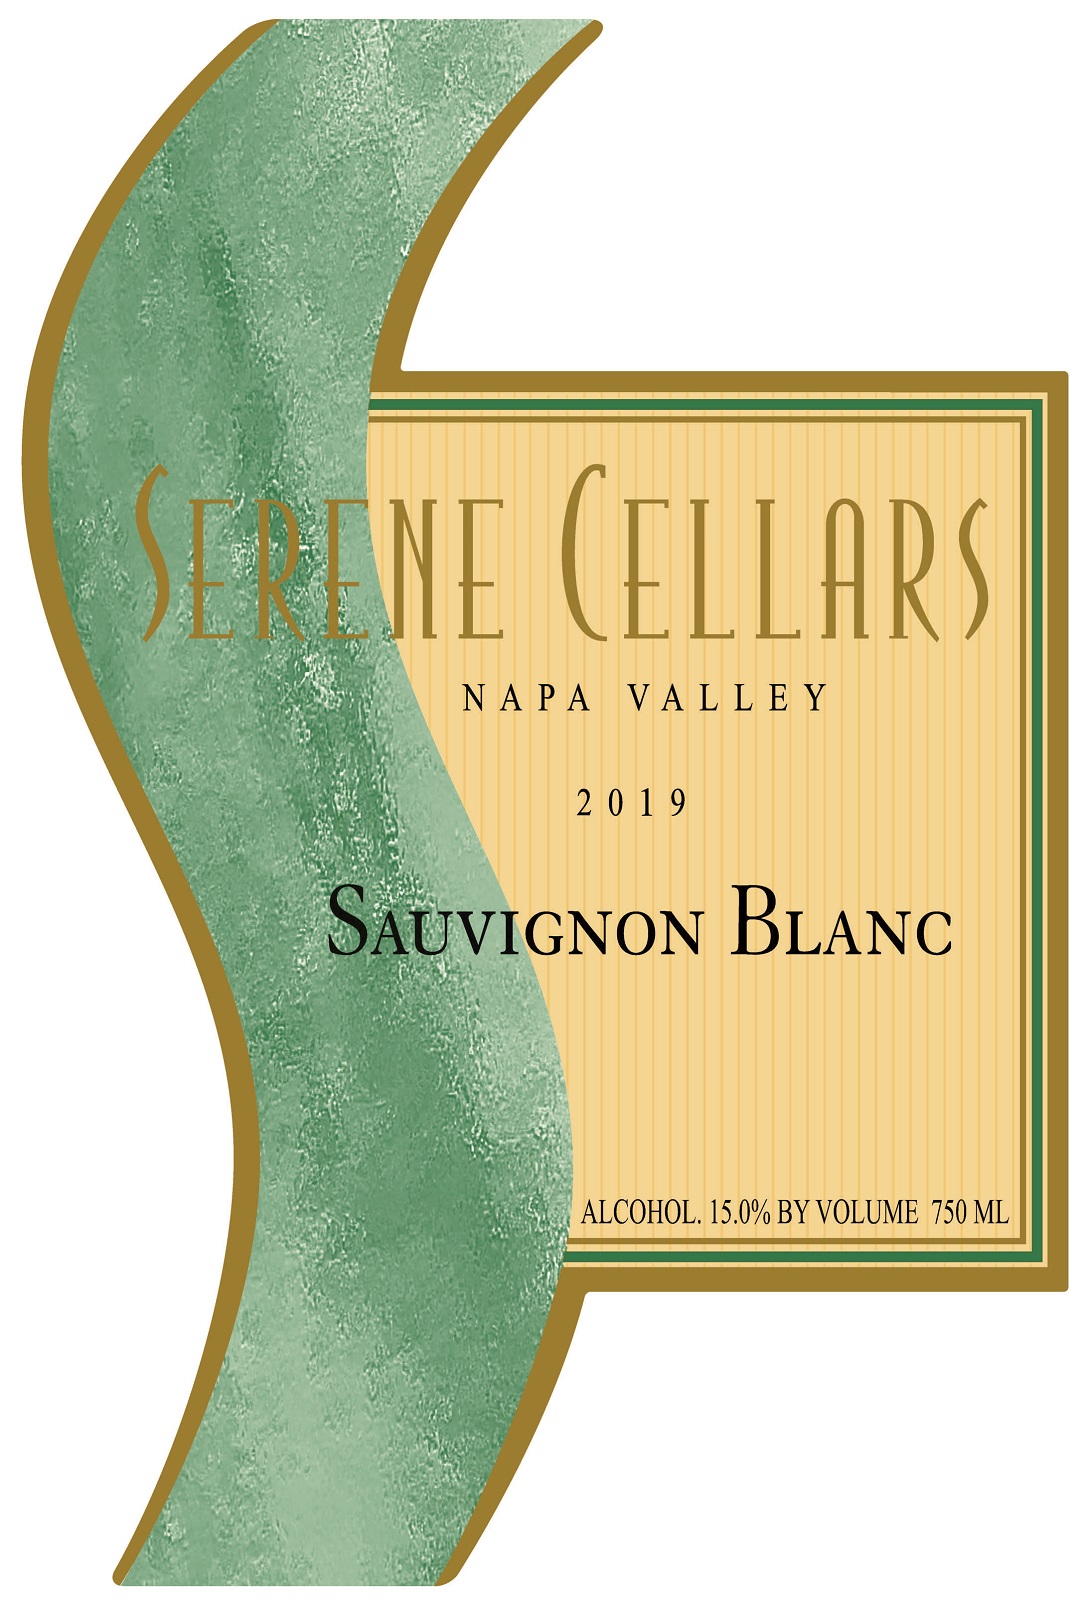 Product Image for 2019 Napa Valley Sauvignon Blanc "The Tease"